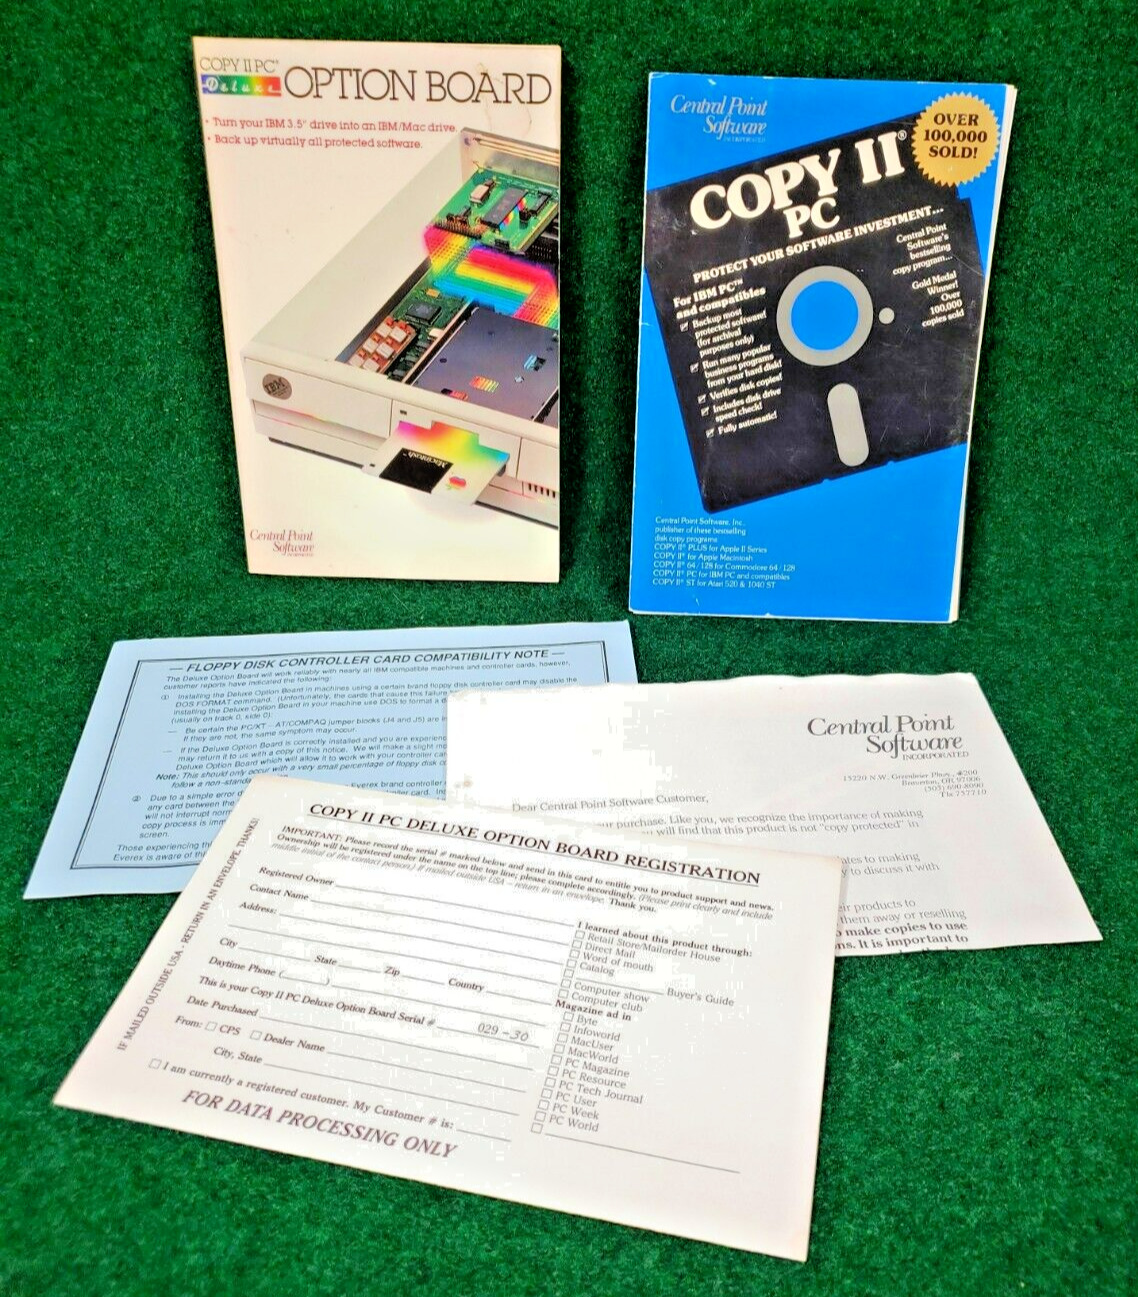 Manuals for Copy II Plus PC Software and Option Board.